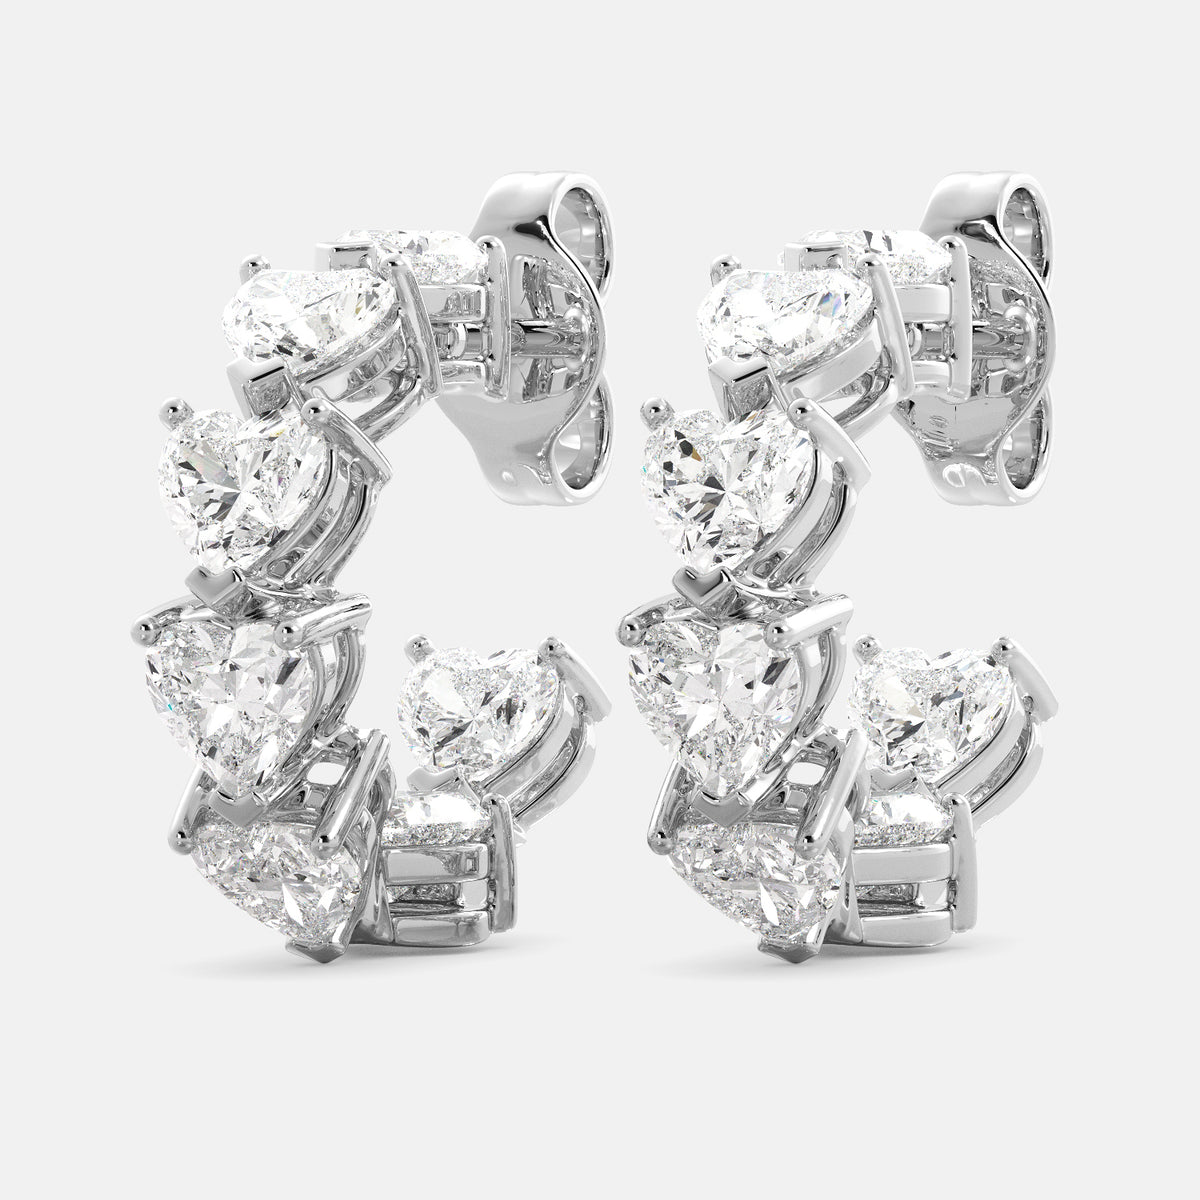 A pair of heart-shaped diamond hoop earrings in recycled white gold. The earrings are made of recycled white gold and have a simple, elegant design. The hoops are approximately 1 inch in diameter and are set with heart-shaped diamonds. The diamonds are sparkling and reflect light beautifully. The earrings are a perfect gift for a loved one or a special occasion.